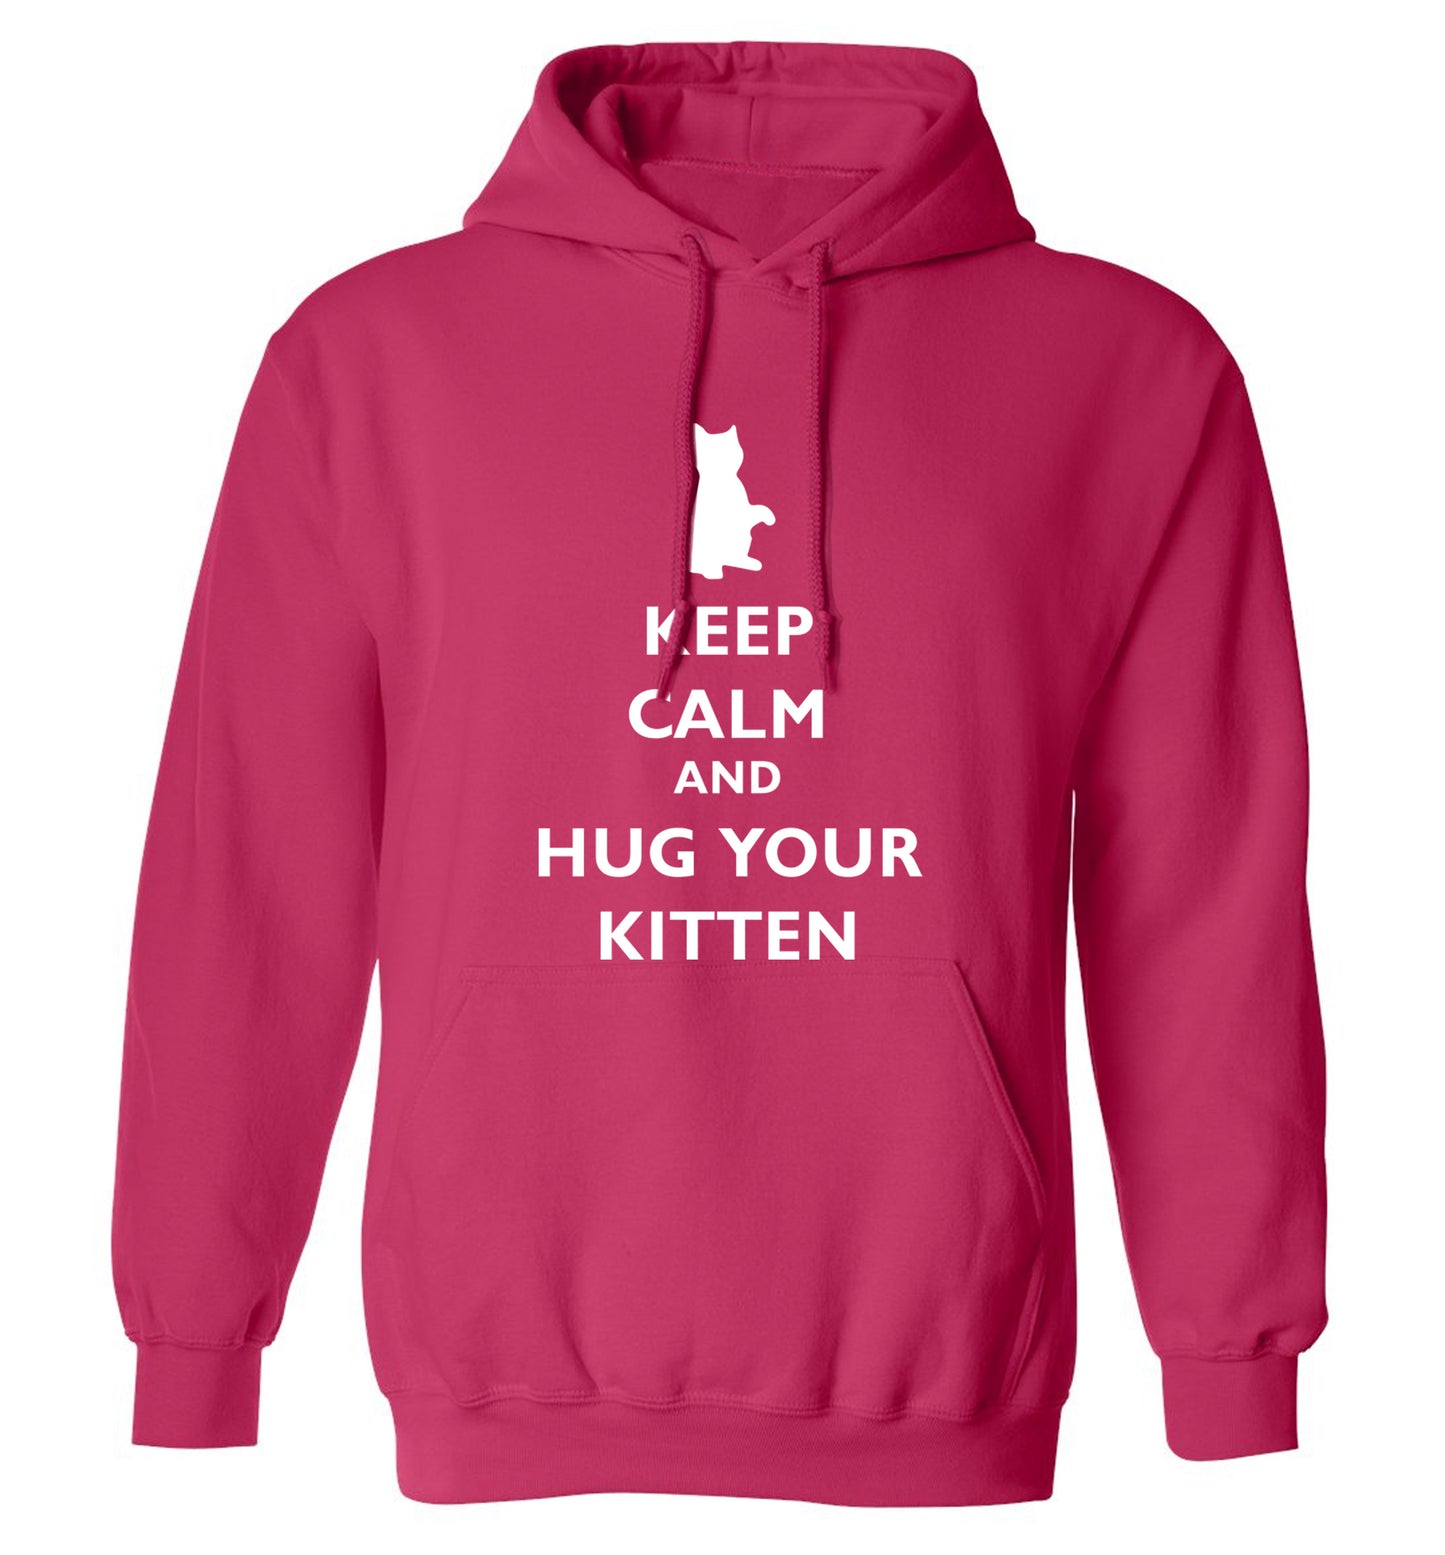 Keep calm and hug your kitten adults unisex pink hoodie 2XL